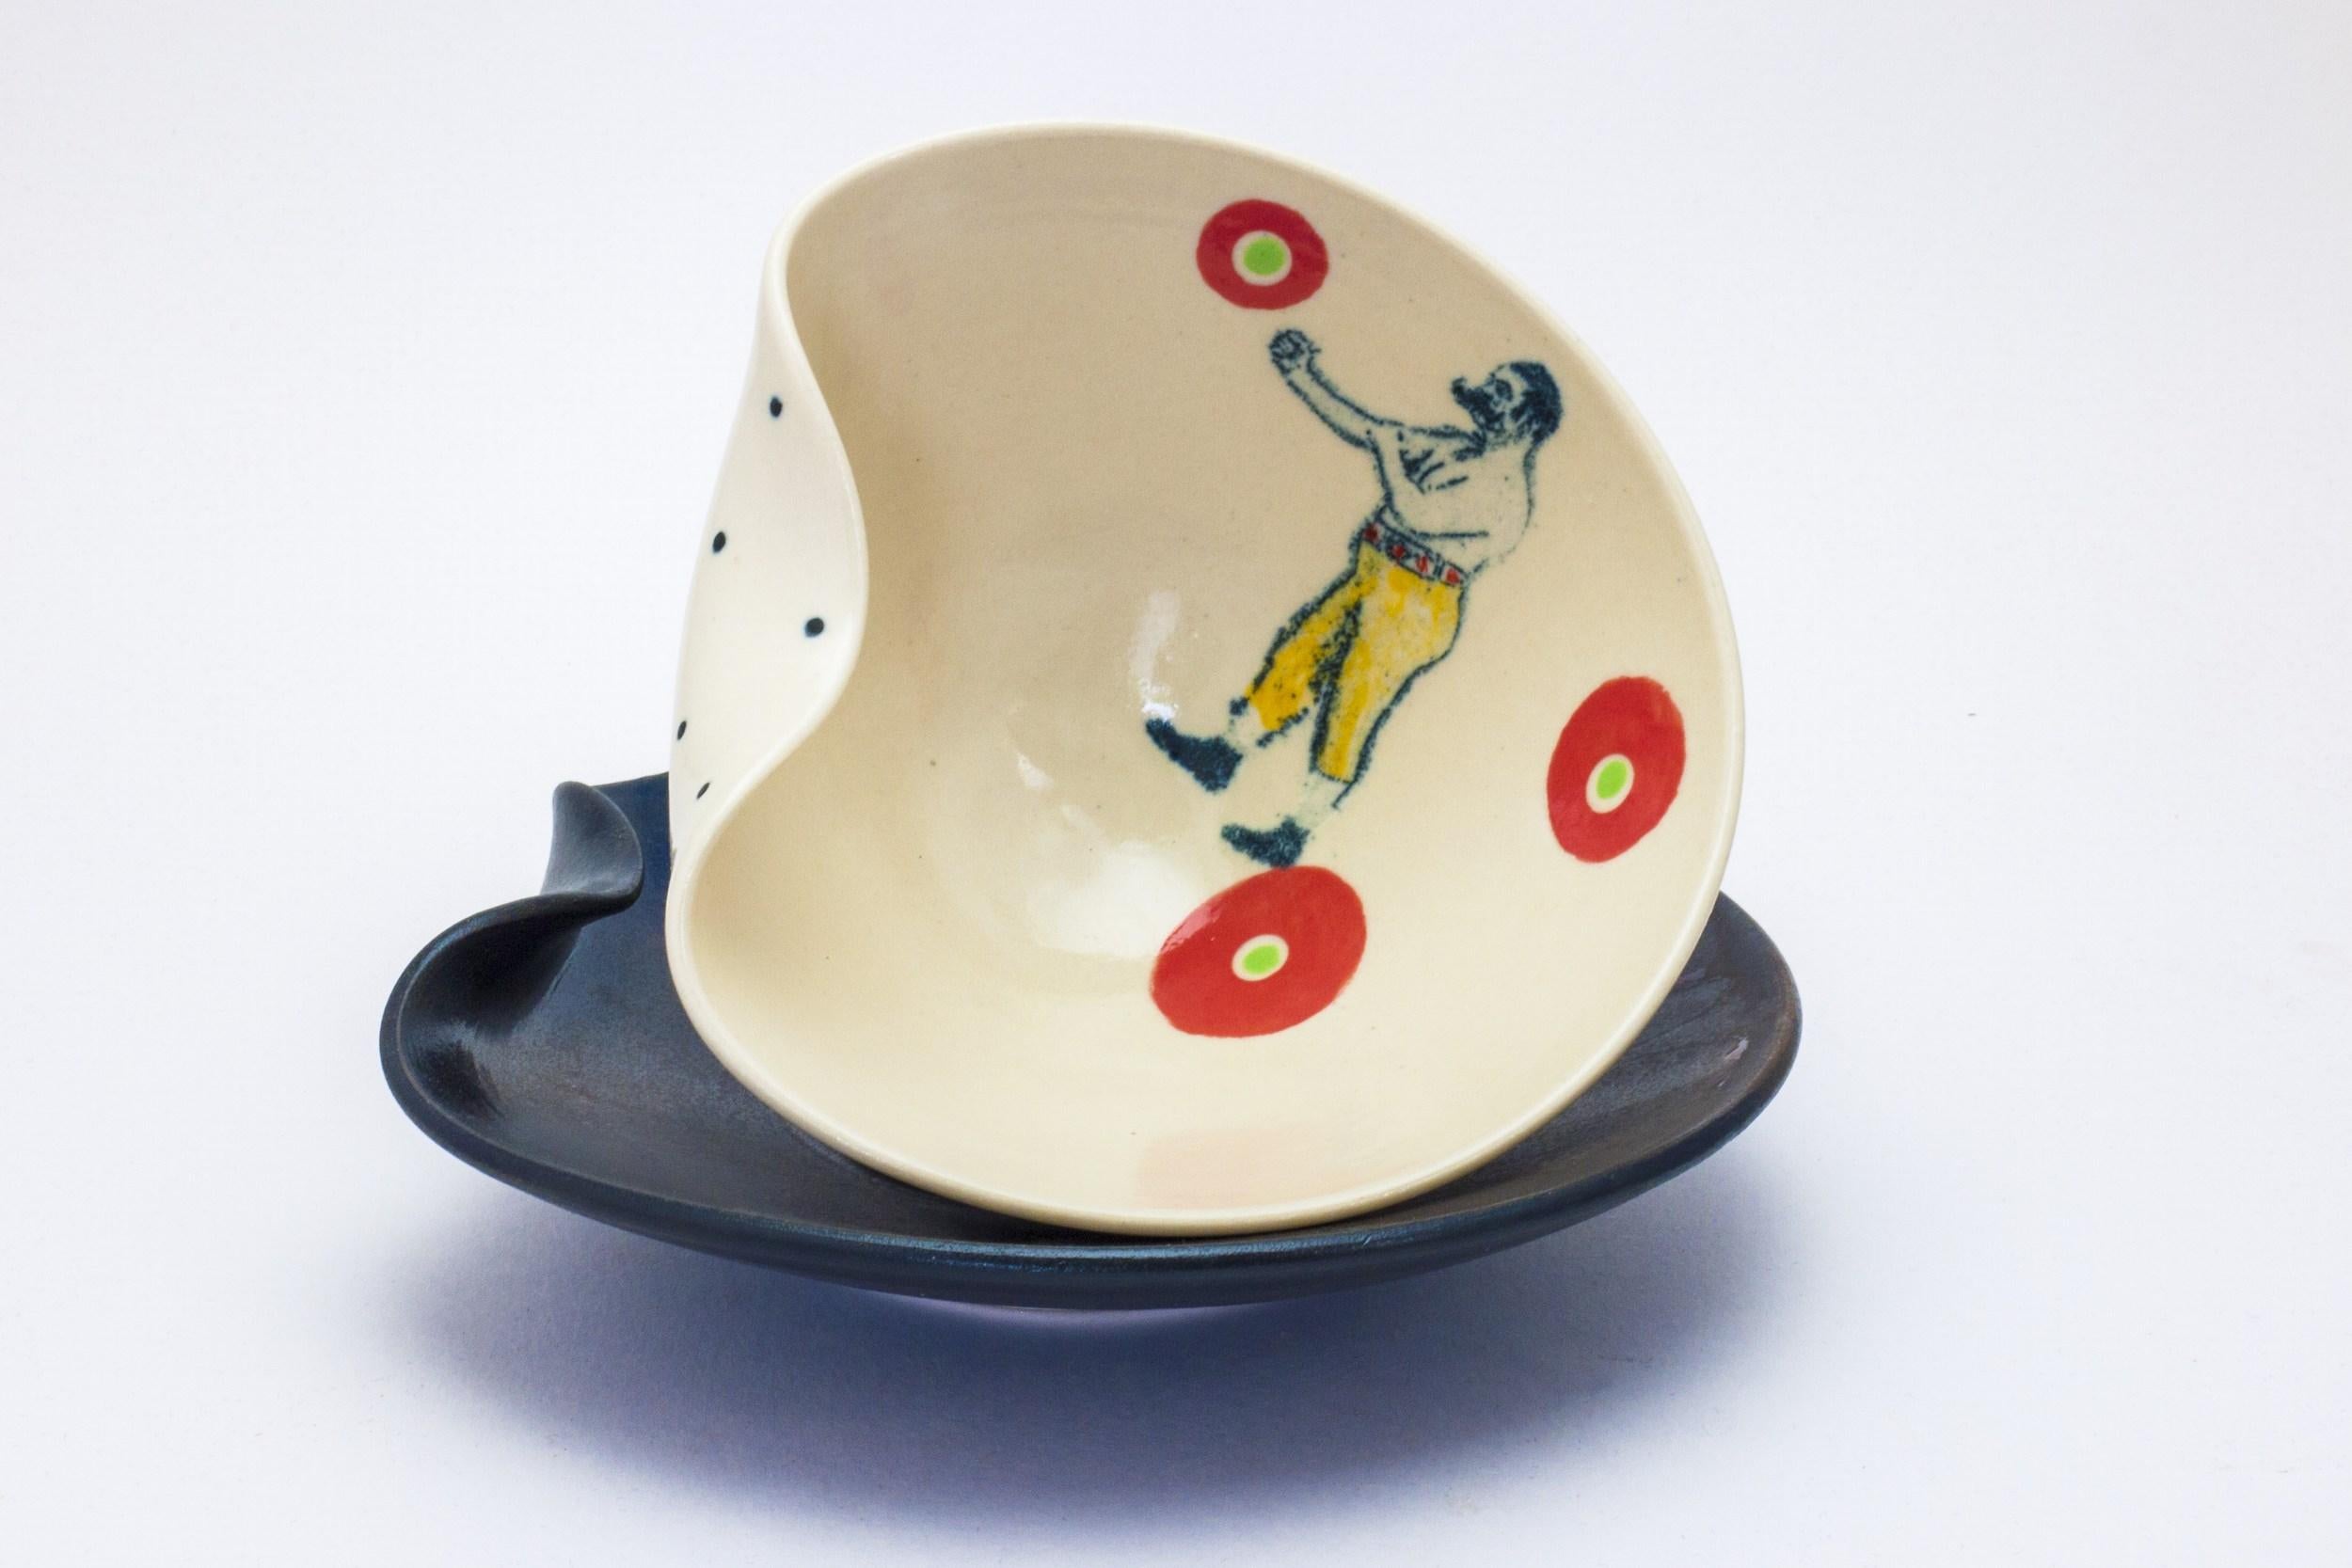 Lithograph printed soup bowl with plate - Sculpture by Theresa Robinson